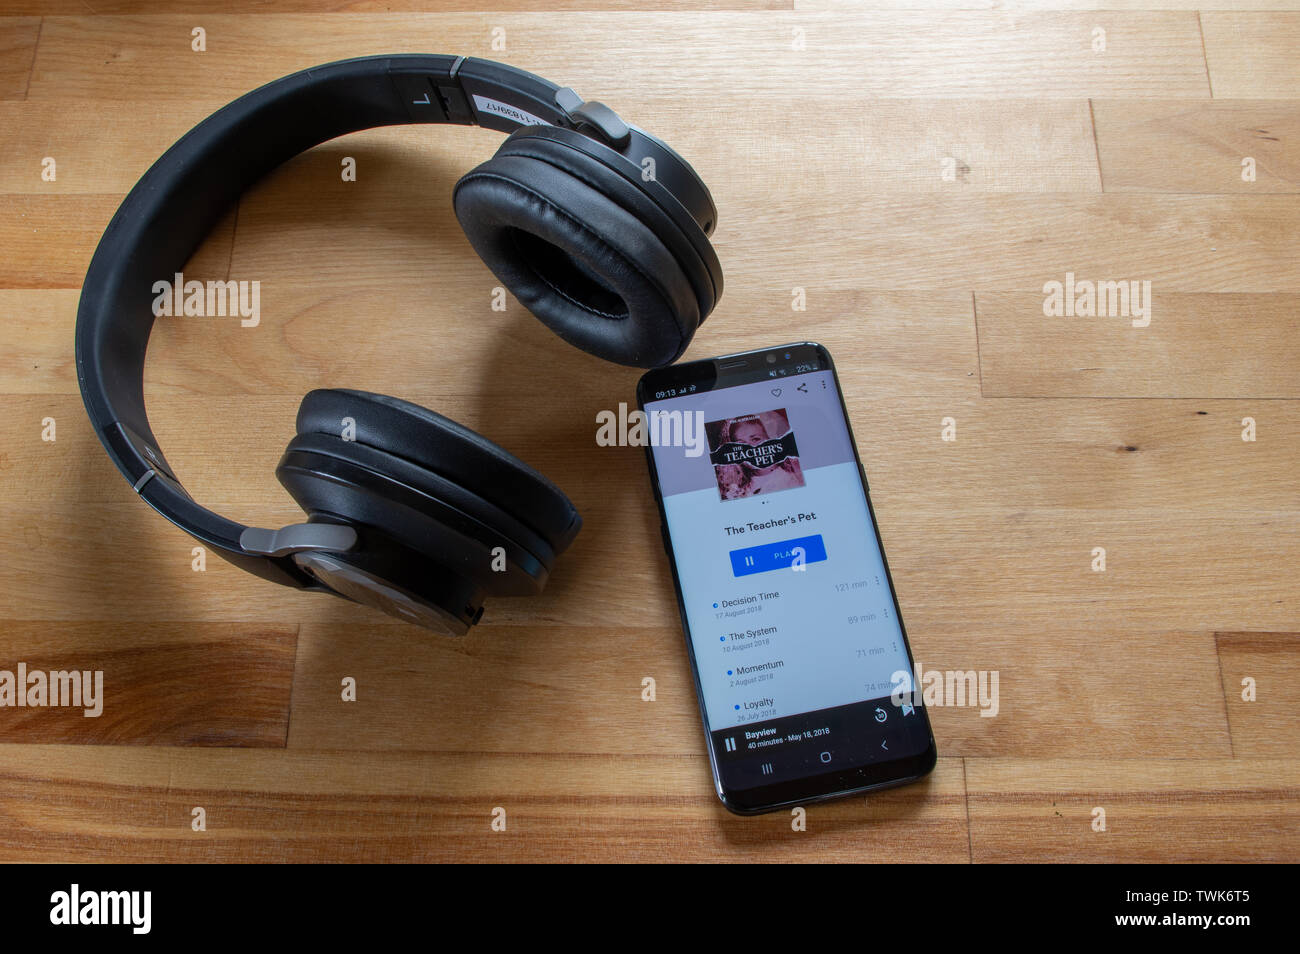 ''The Teacher's Pet' Podcast by The Australian on Android phone Stock Photo